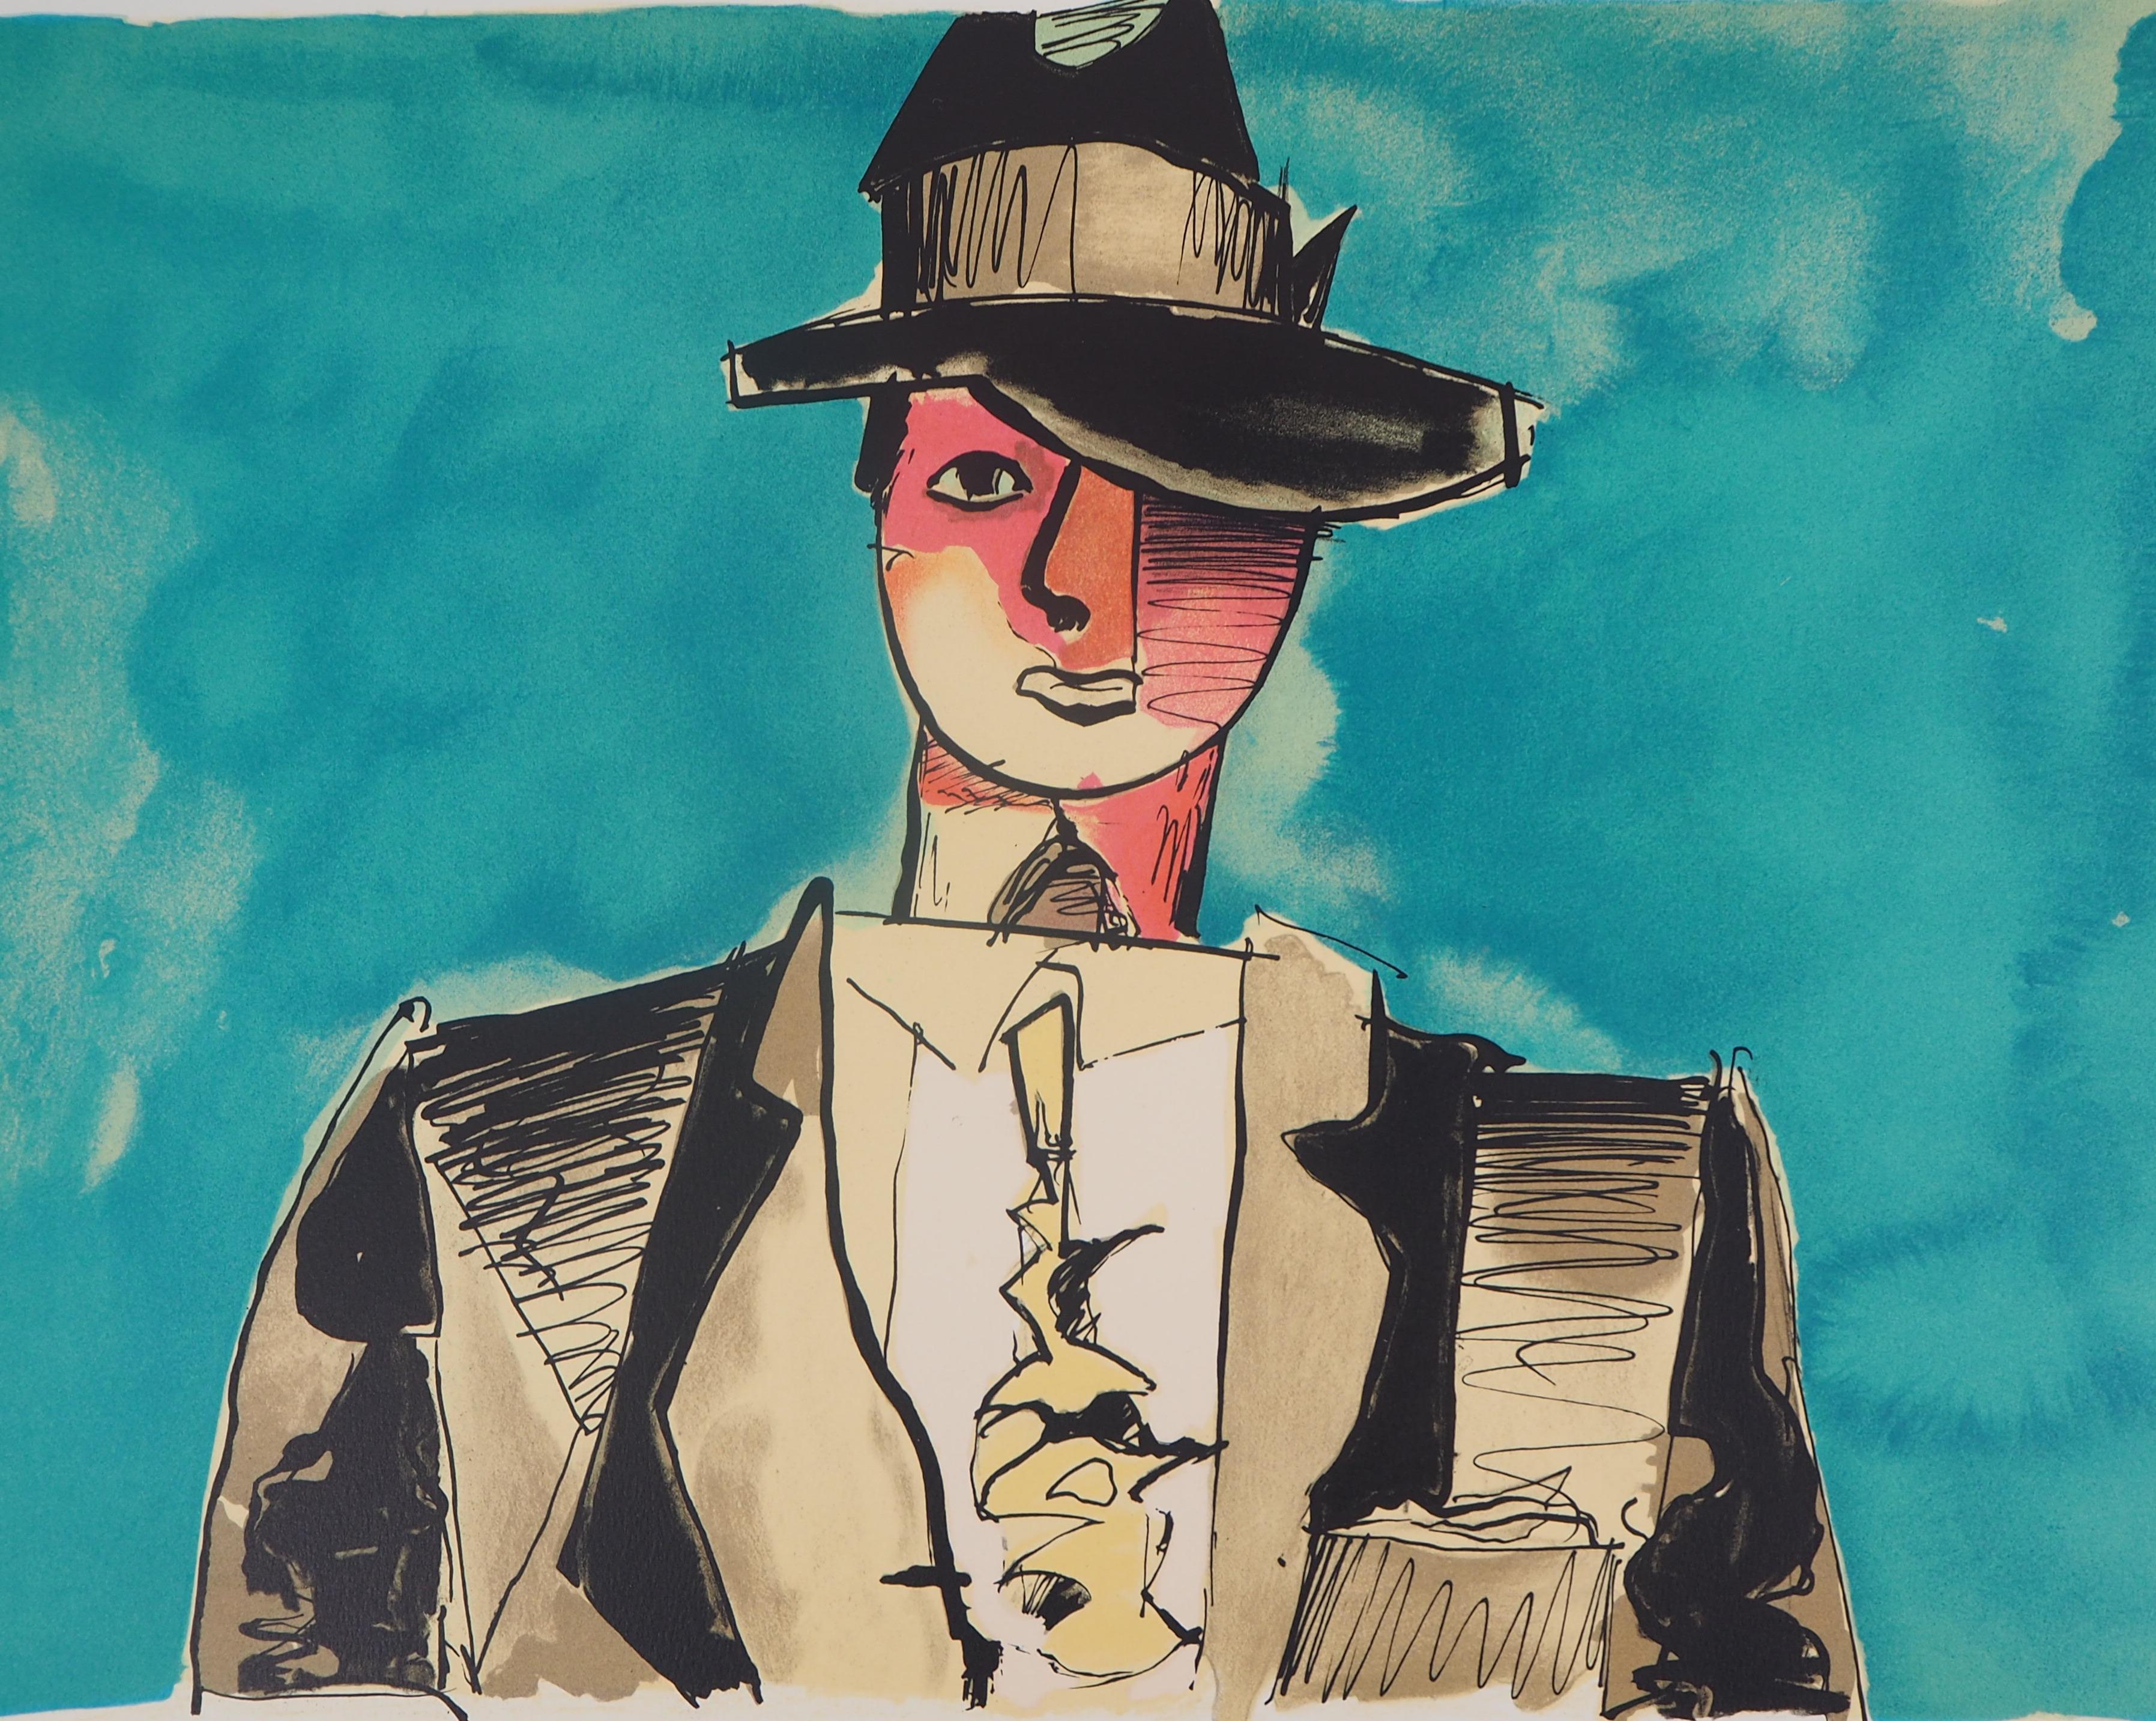 Elegant Man with a Hat - Original handsigned lithograph - 100 copies - Pop Art Print by Jean Helion